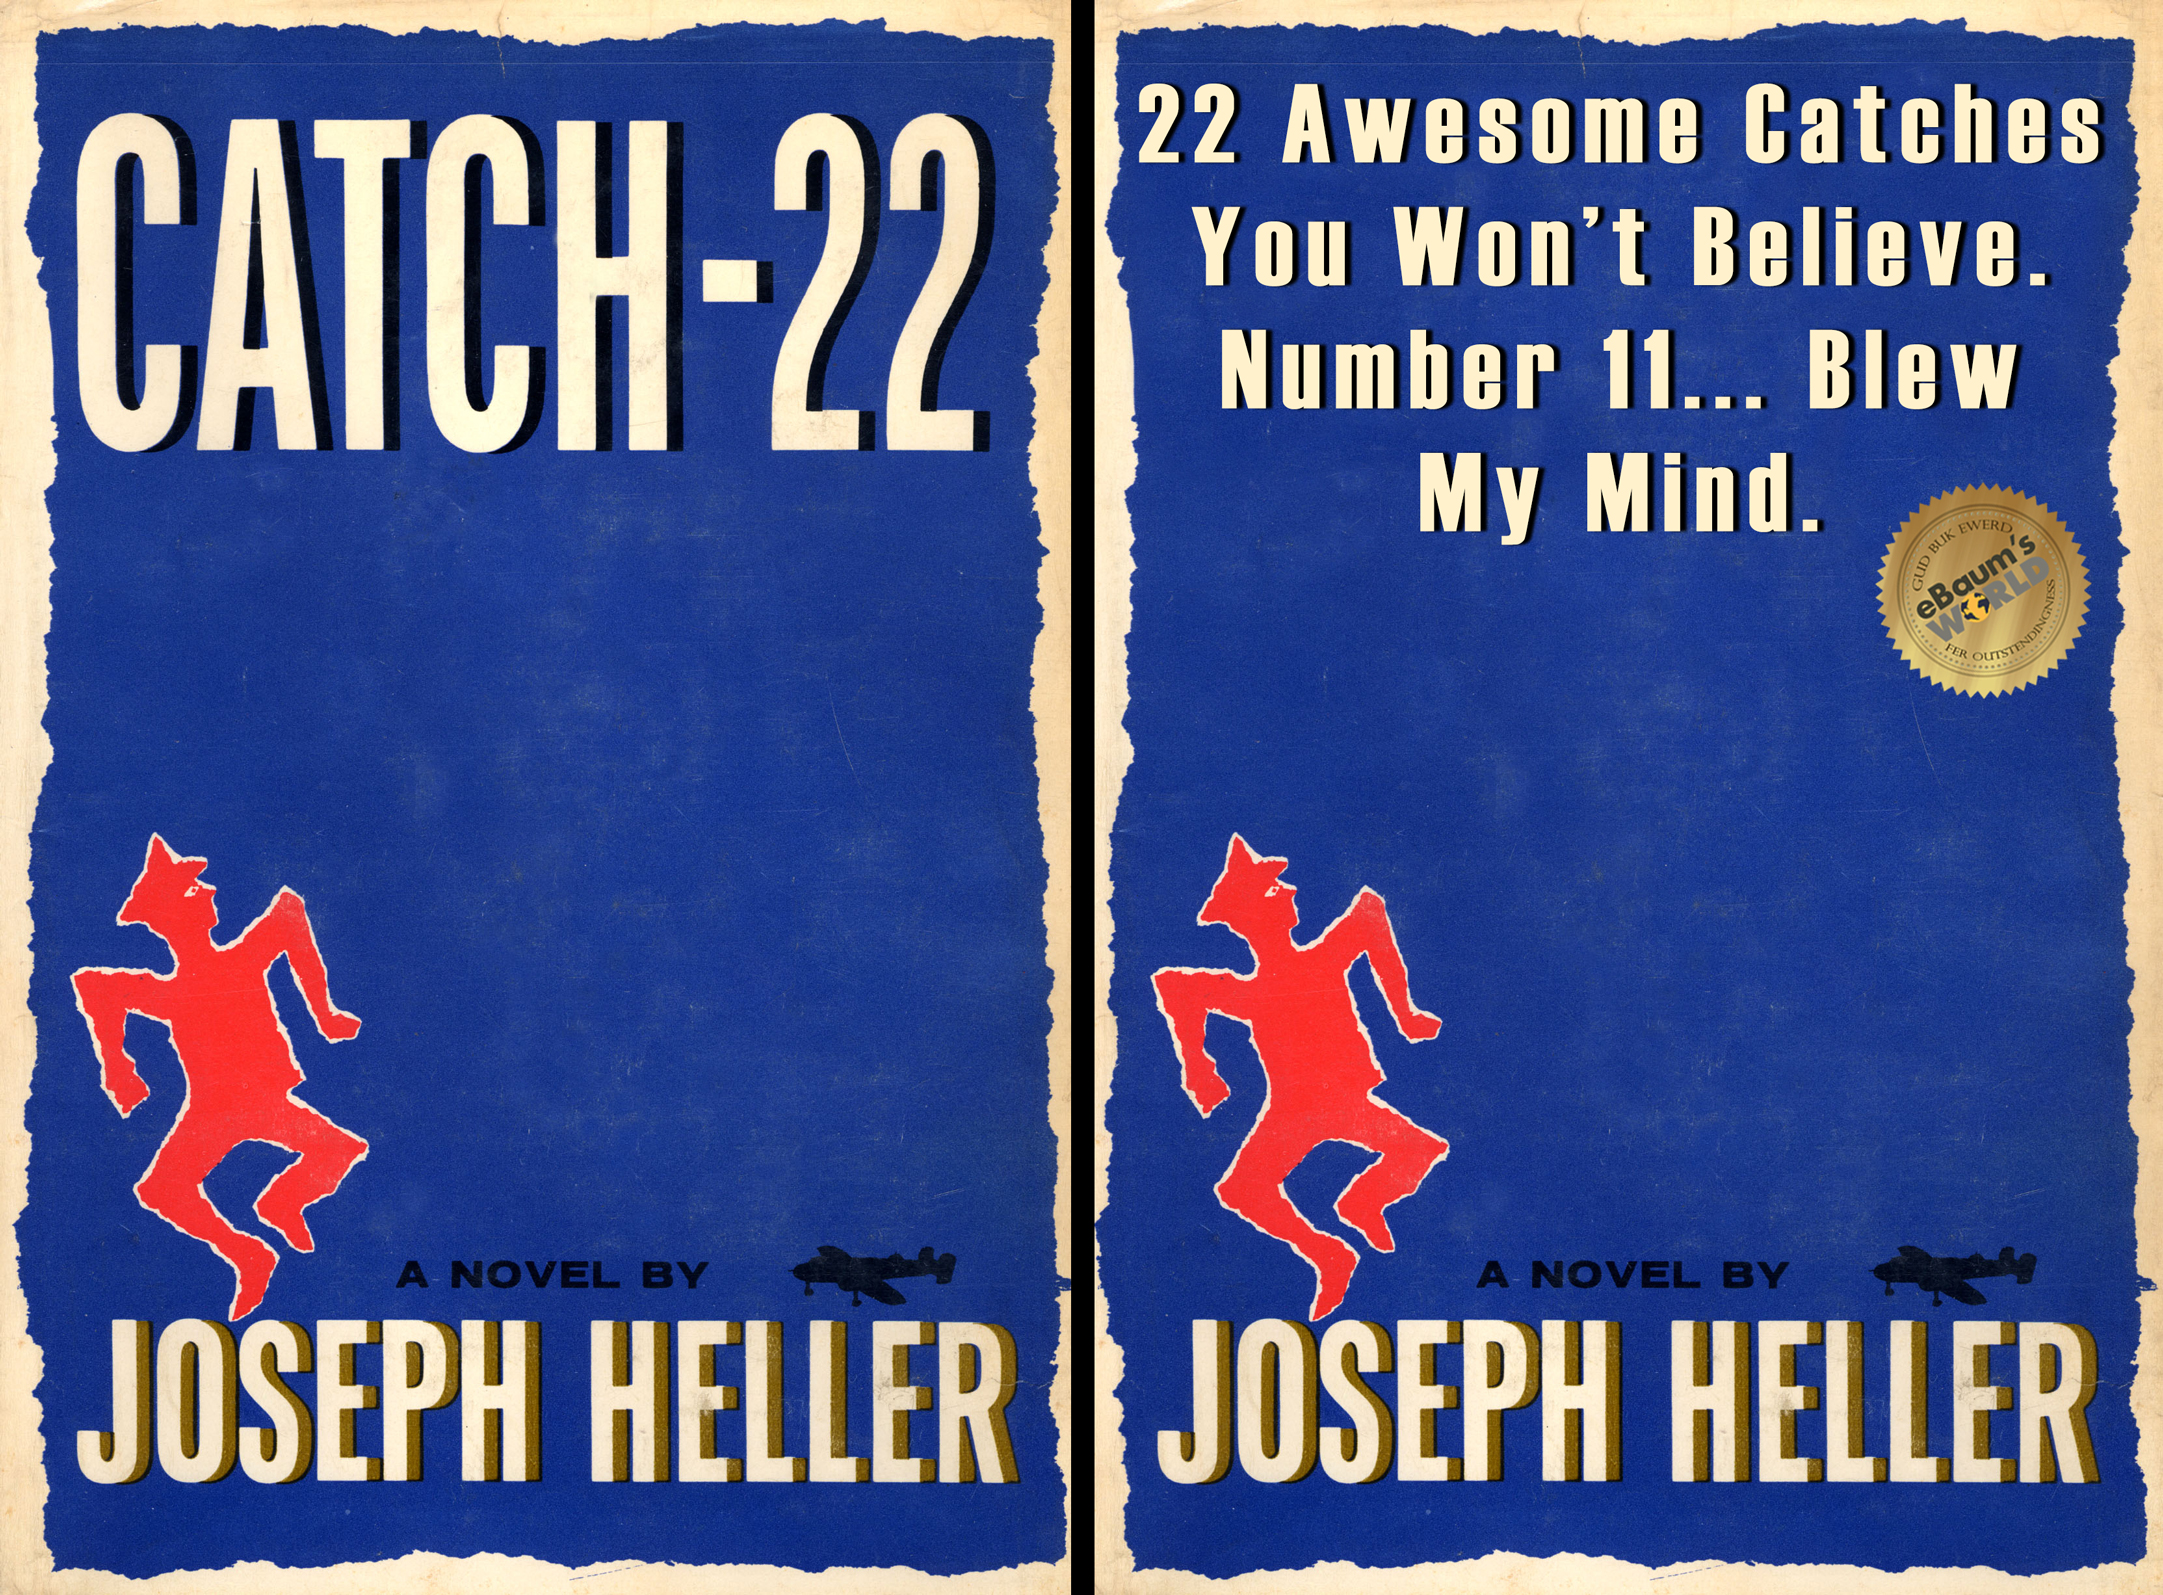 catch 22 book - Catch22A 22 Awesome Catches You Won't Believe. Number 11... Blew My Mind. A Novel By A Novel By Joseph Heller Joseph Heller